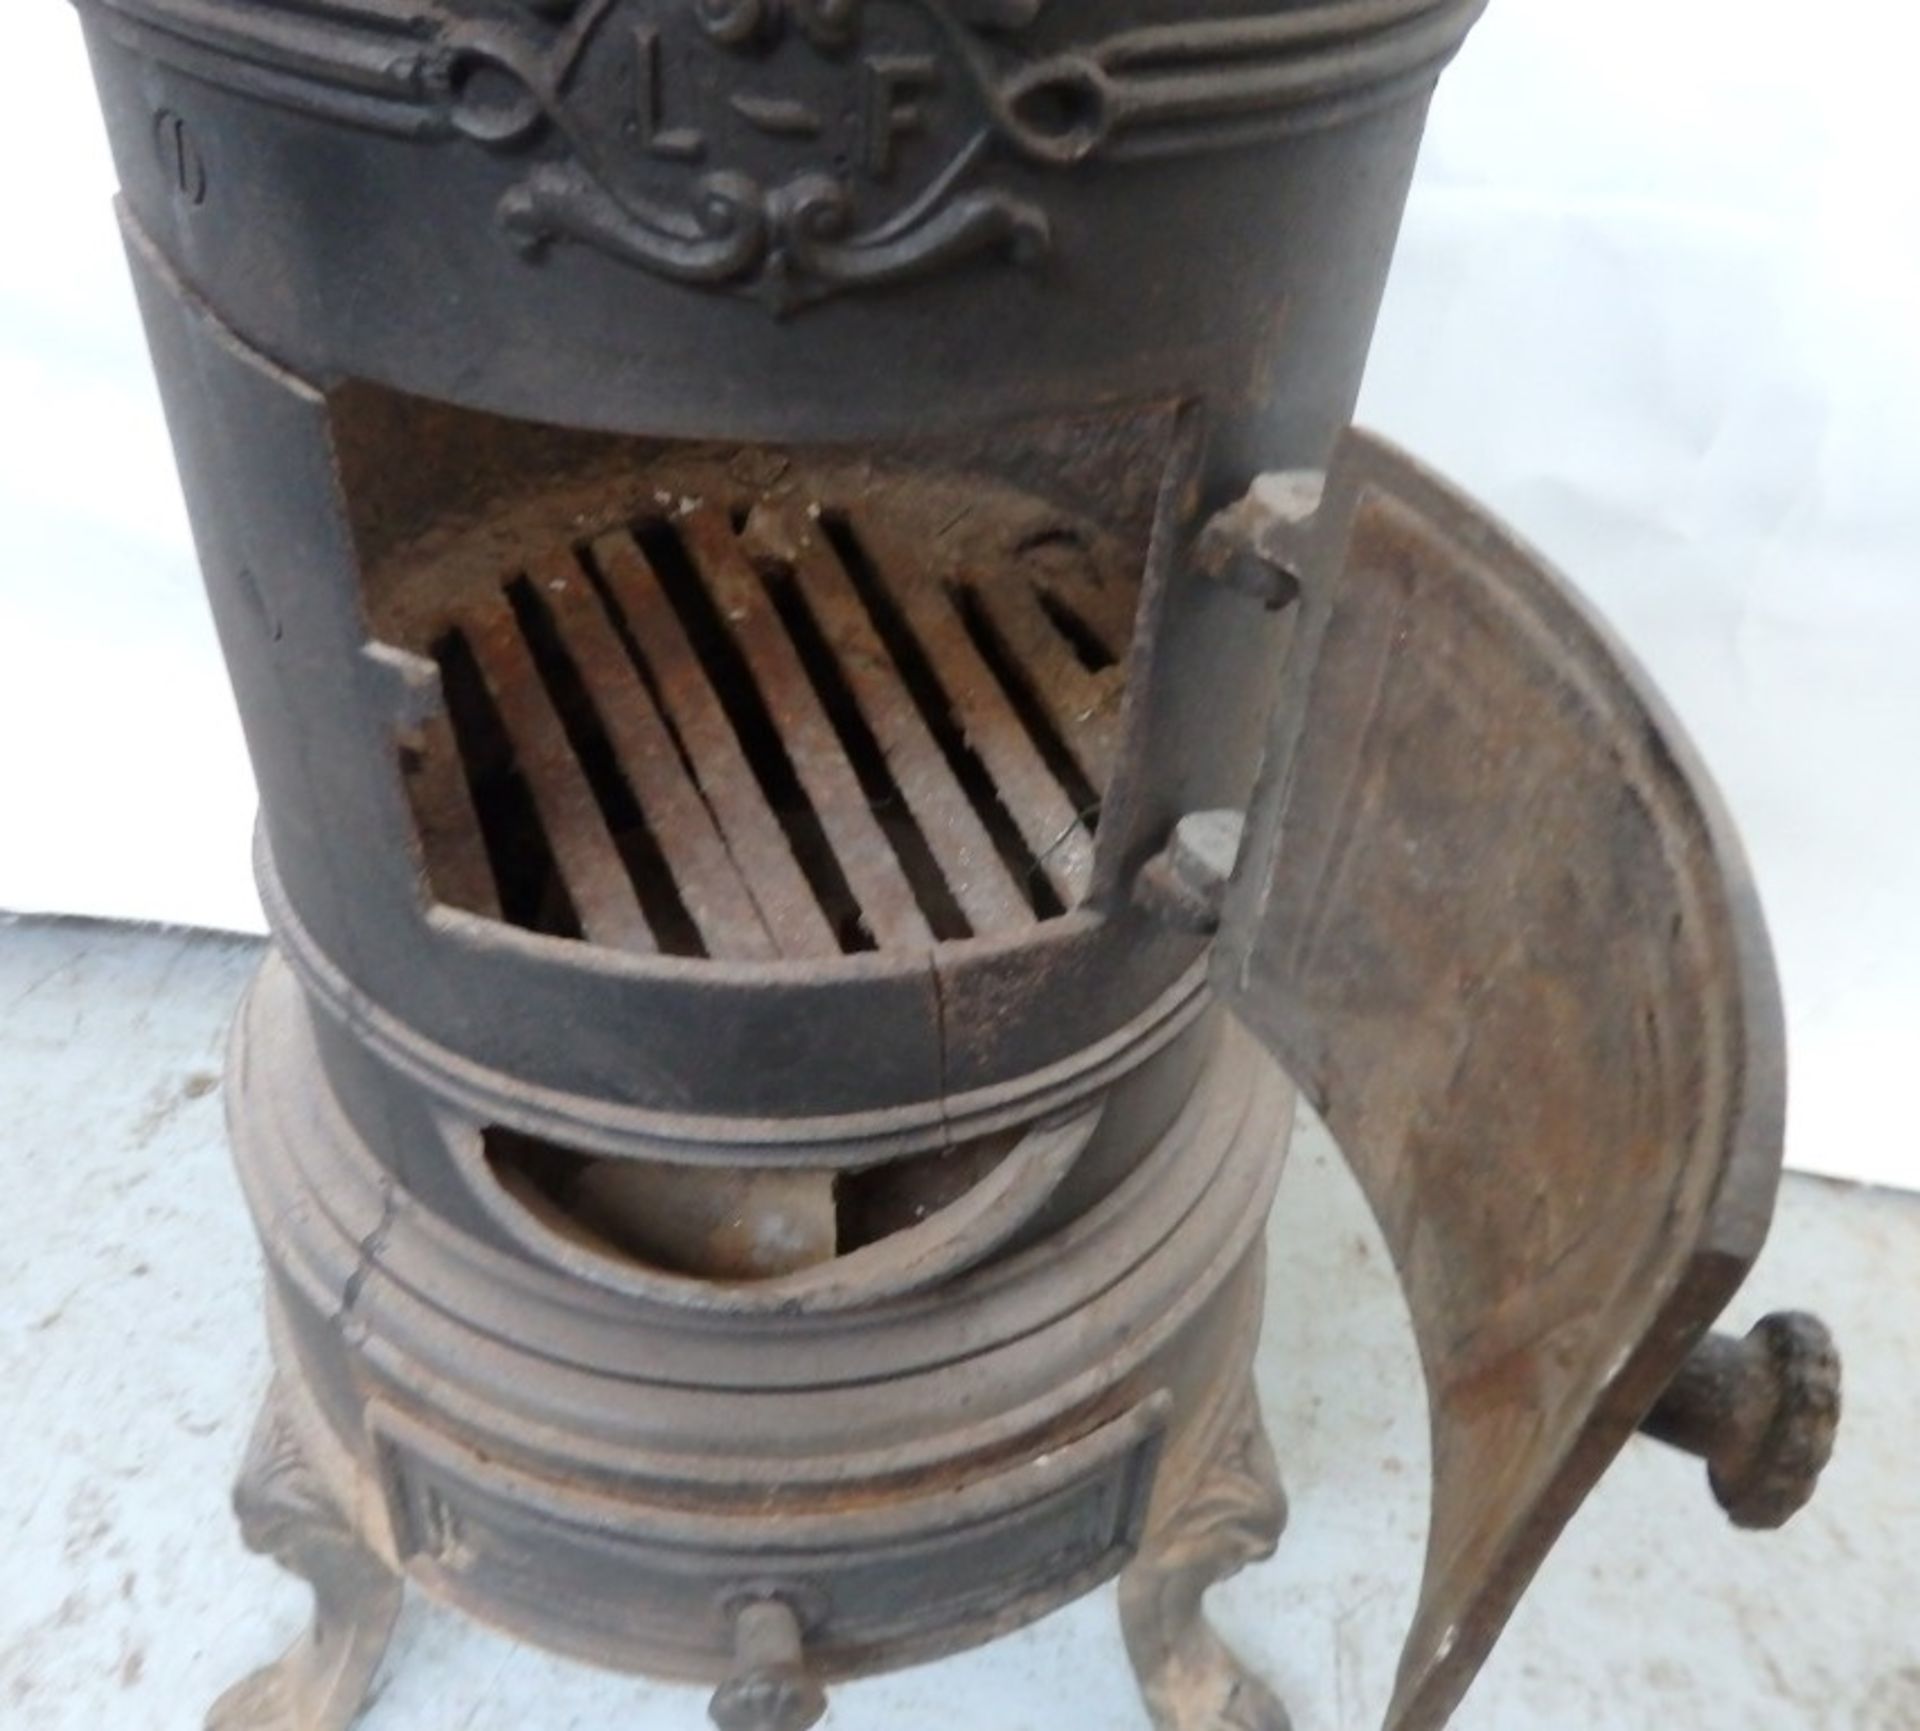 1 x Reclaimed Antique Cast Iron Potbelly Wood Burner / Stove - Dimensions: H61, Diameter 30cm - - Image 18 of 18